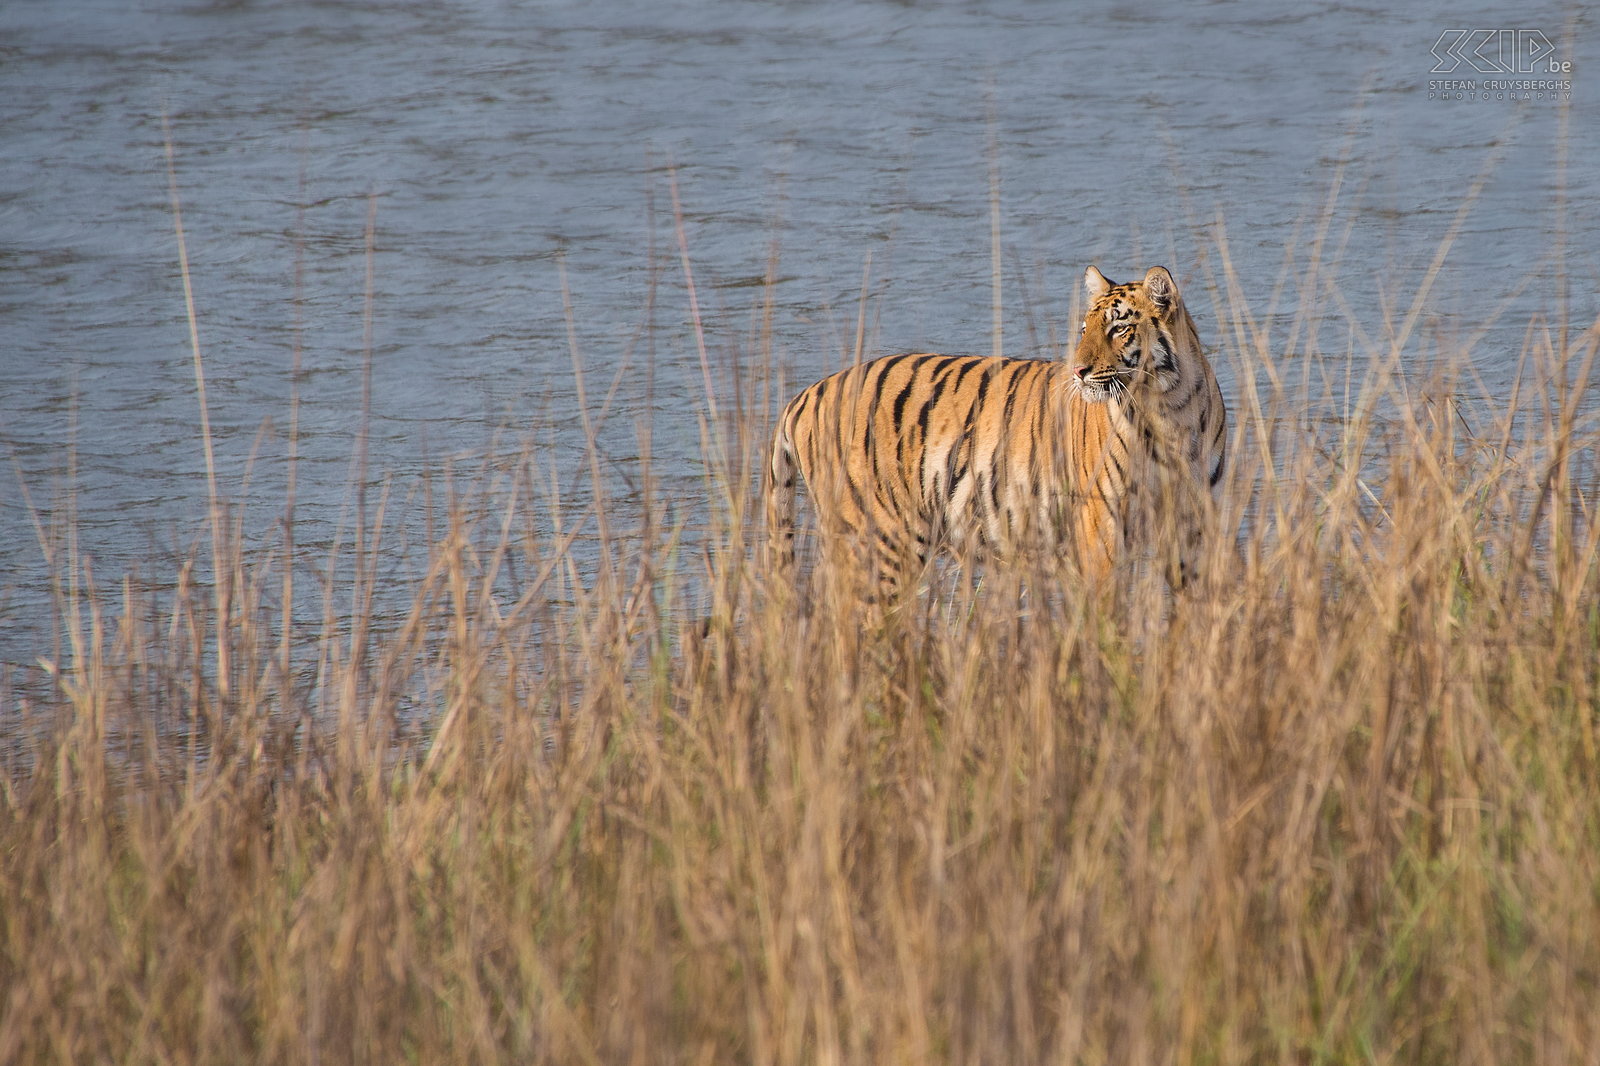 Tadoba - Tigress Tadoba Andhari Tiger Reserve (TATR) is a national park in the state of Maharashtra. It is still a relatively unknown park but one of the best places in the world to spot Bengal tigers in the wild. During our first game drive we spotted a tigress in the high grass at Telia lake Stefan Cruysberghs